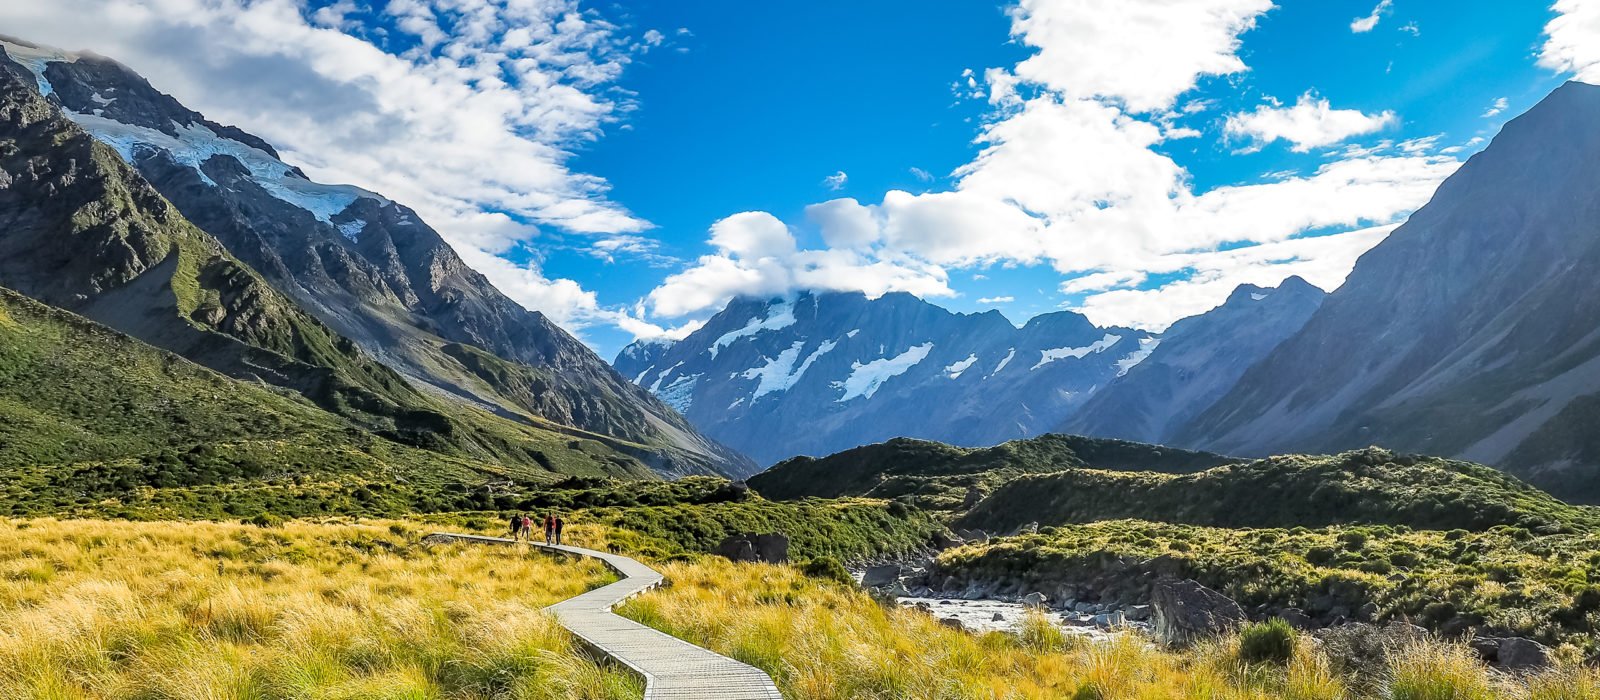 luxury new zealand tours, private & tailor-made | jacada travel